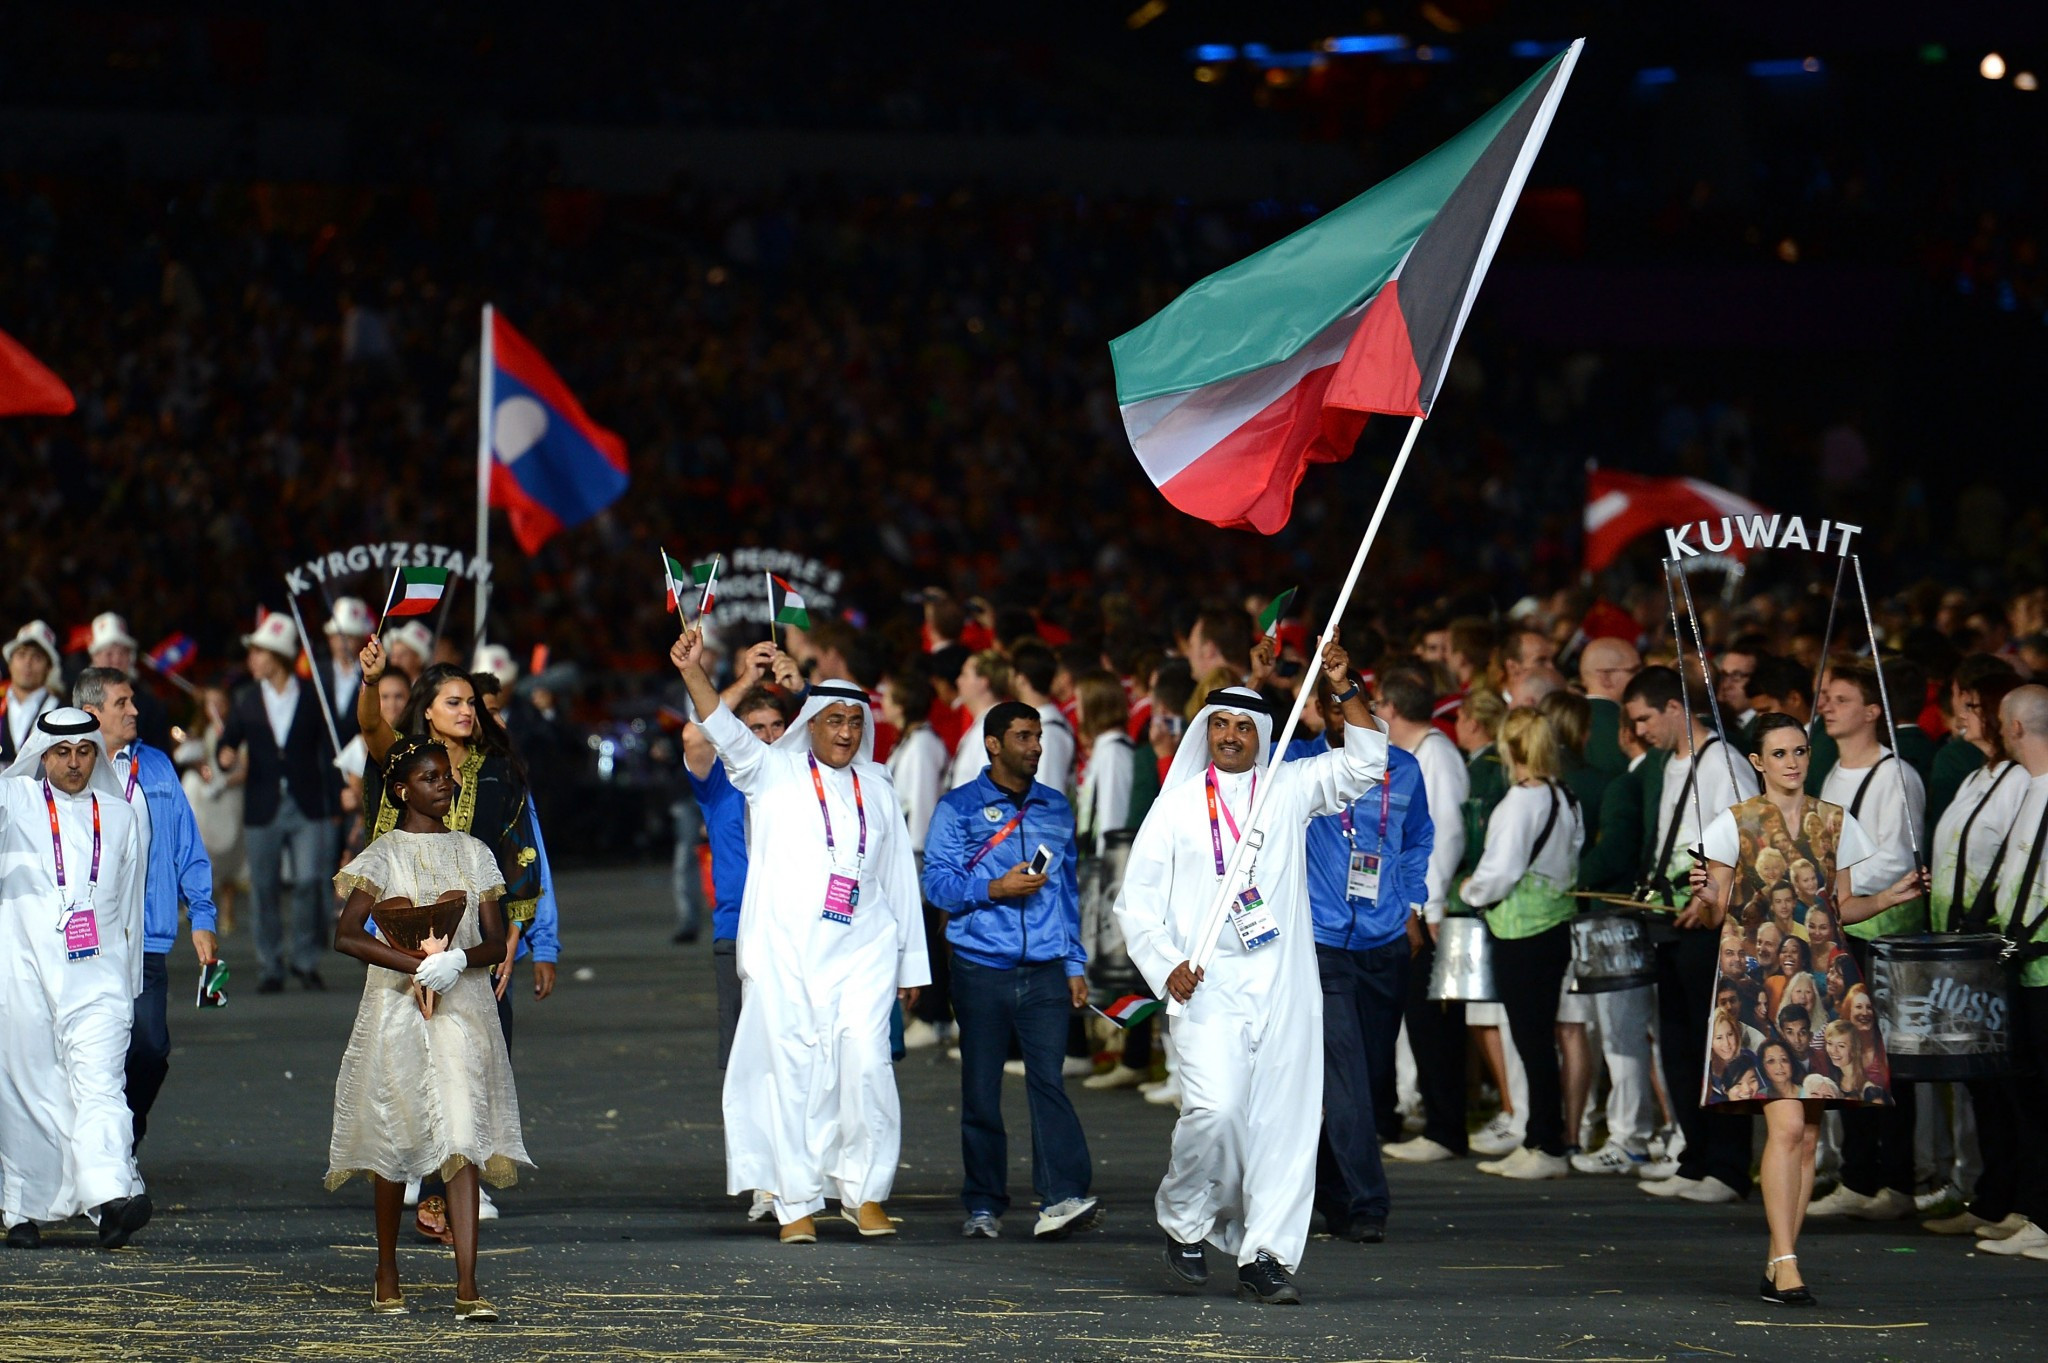 IOC impose conditions for lifting of Kuwaiti Olympic suspension